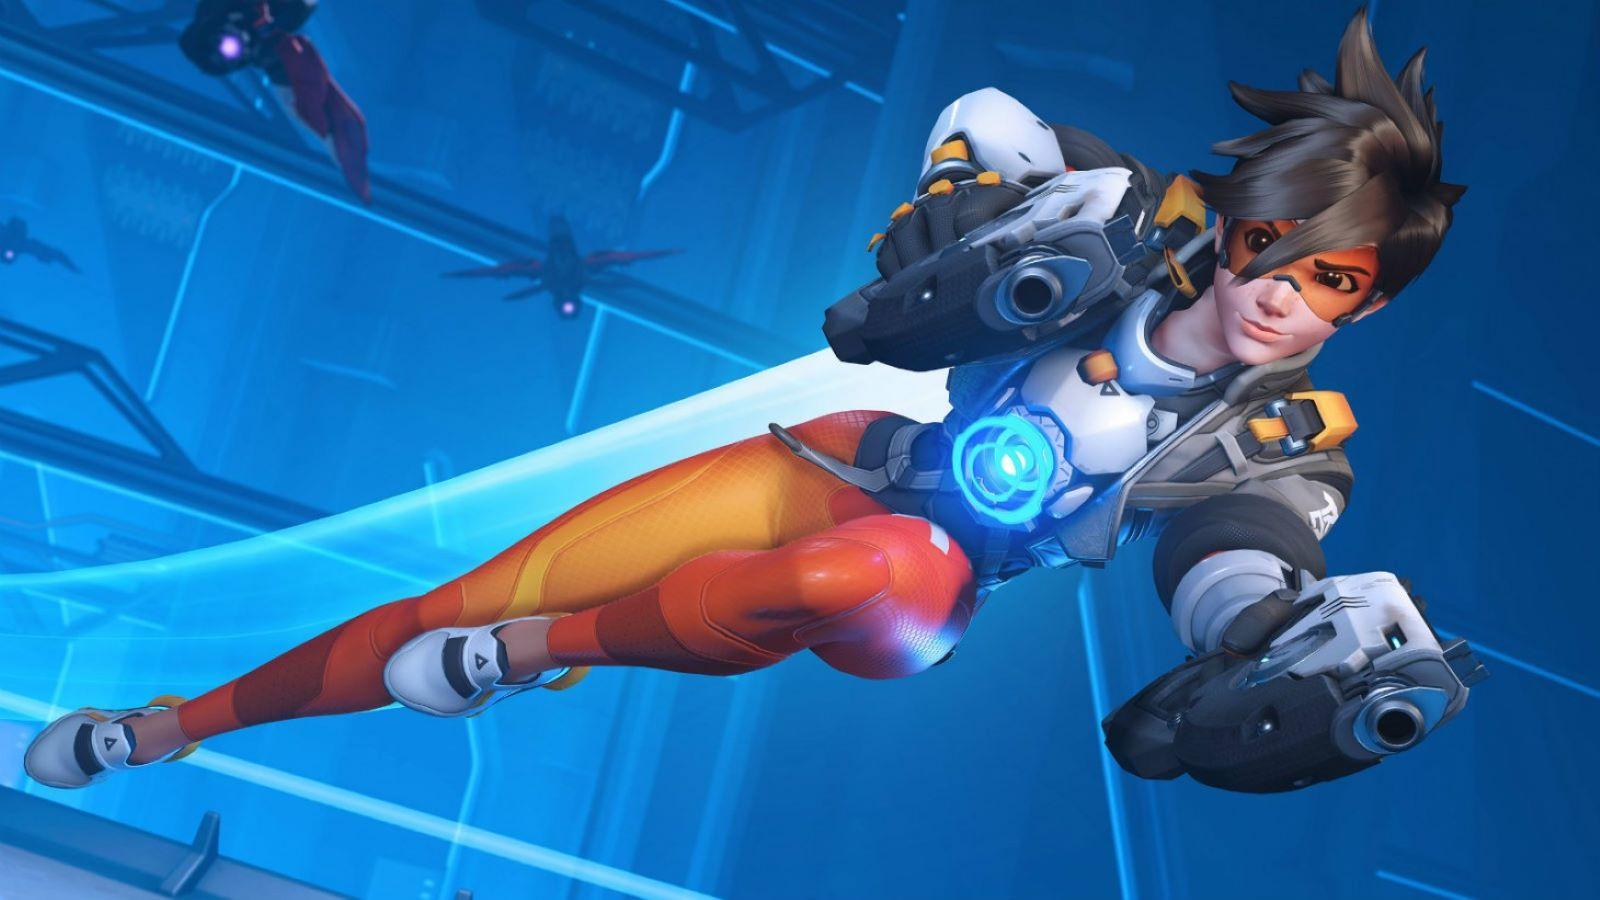 Overwatch 2 Constable Tracer Bundle: How to get, features, price, and more